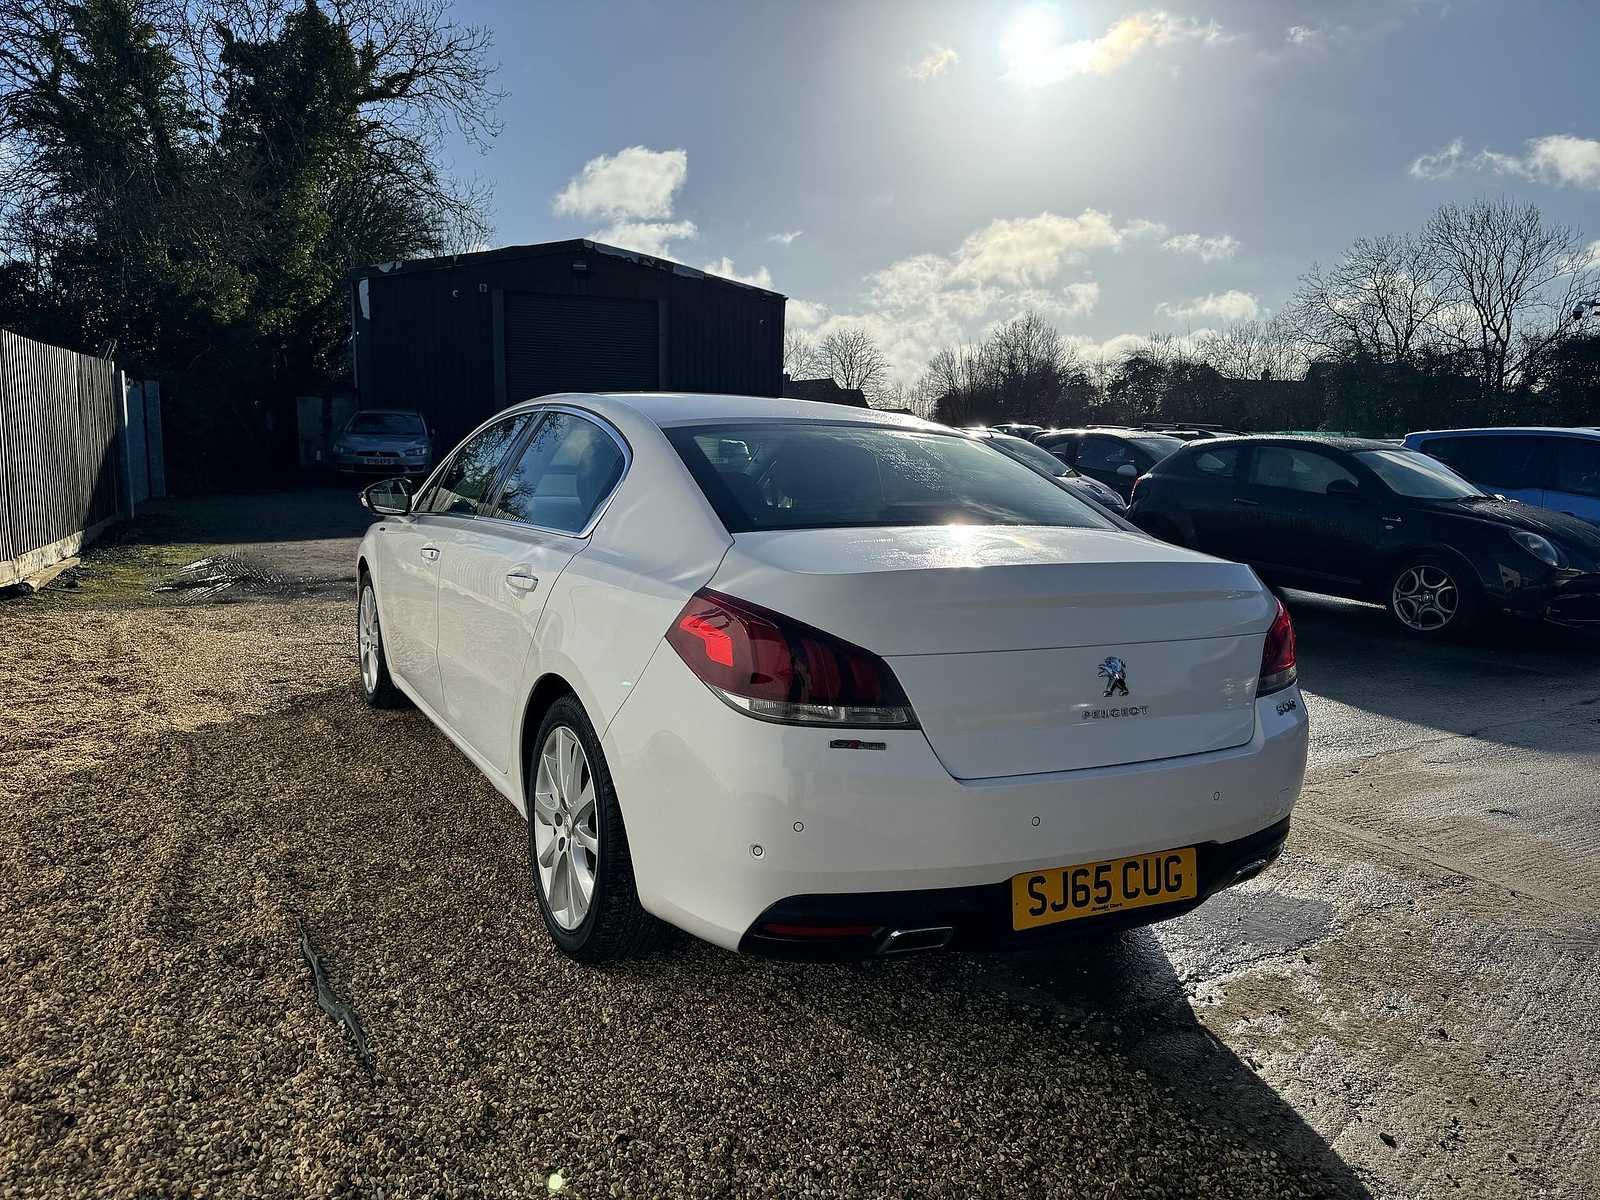 PEUGEOT 508 GT LINE BLUE HDI S/S - Image 6